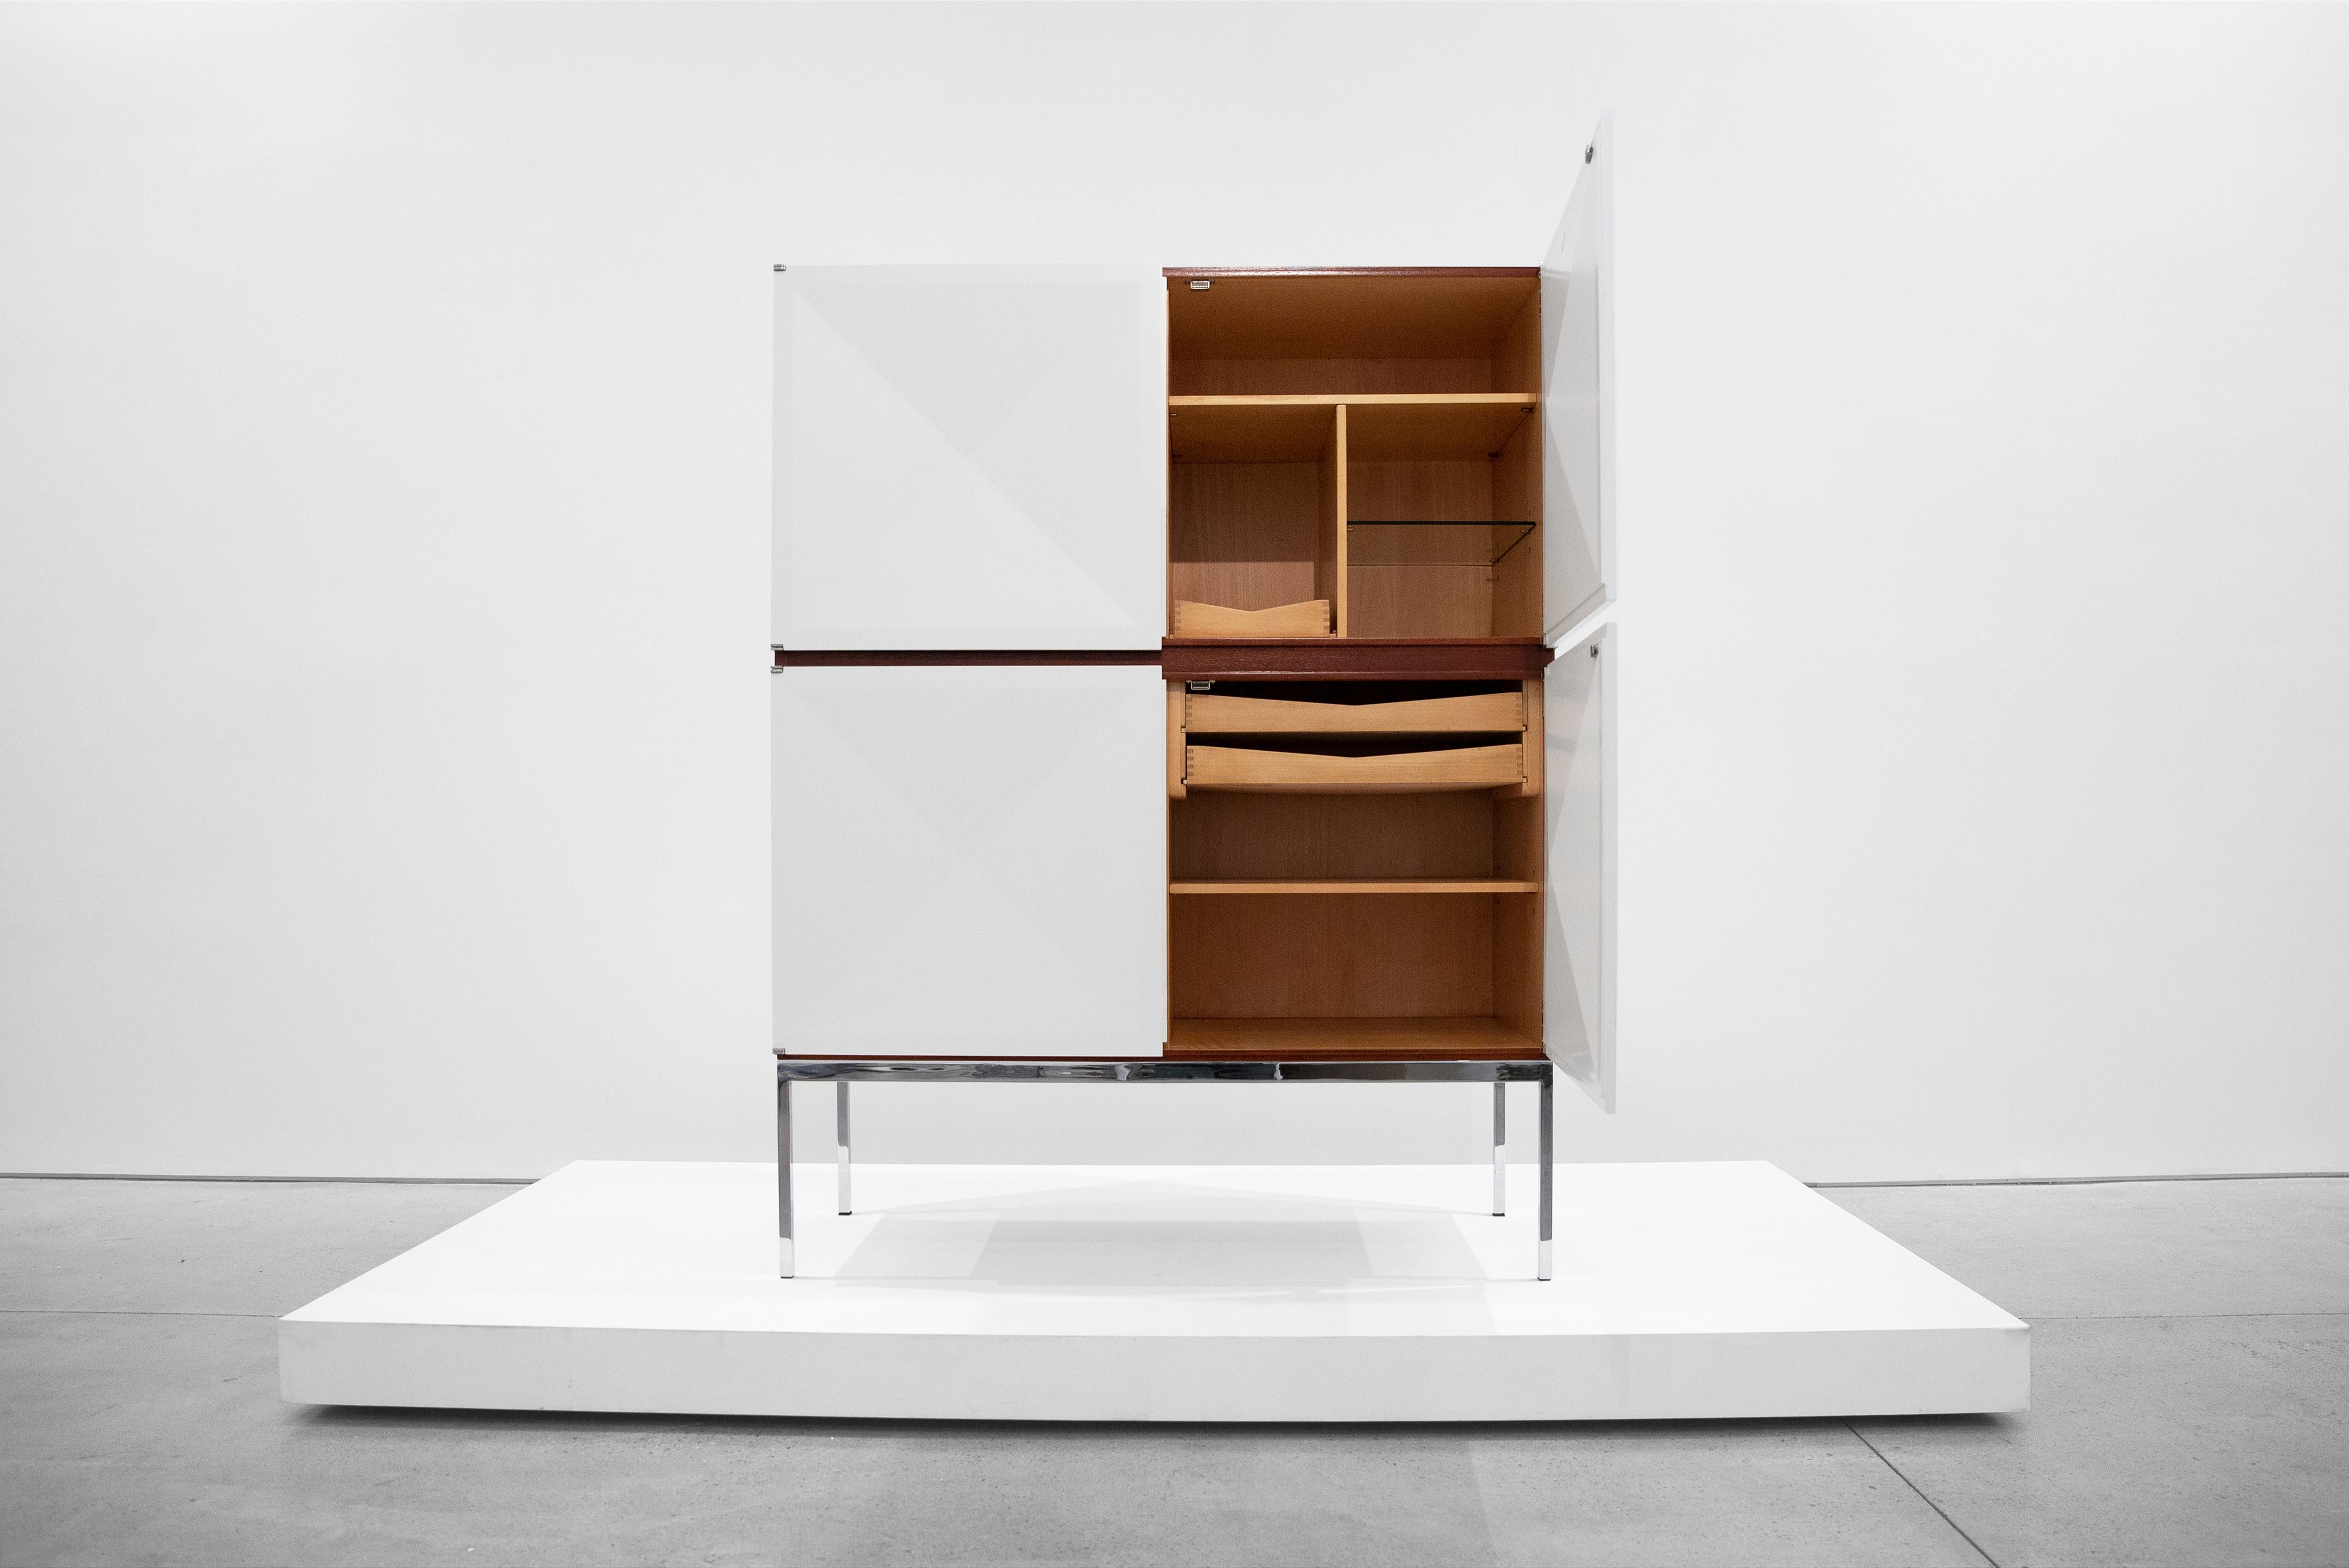 Antoine Philippon & Jacqueline Lecoq, Cabinet, 1307 Series, Edition Erwin Behr, circa 1962, mahogany, chrome-plated steel, Measures: 62 H x 47.25 W x 21 D inches.

This cabinet was designed in 1962 by Antoine Philippon and Jacqueline Lecoq on the